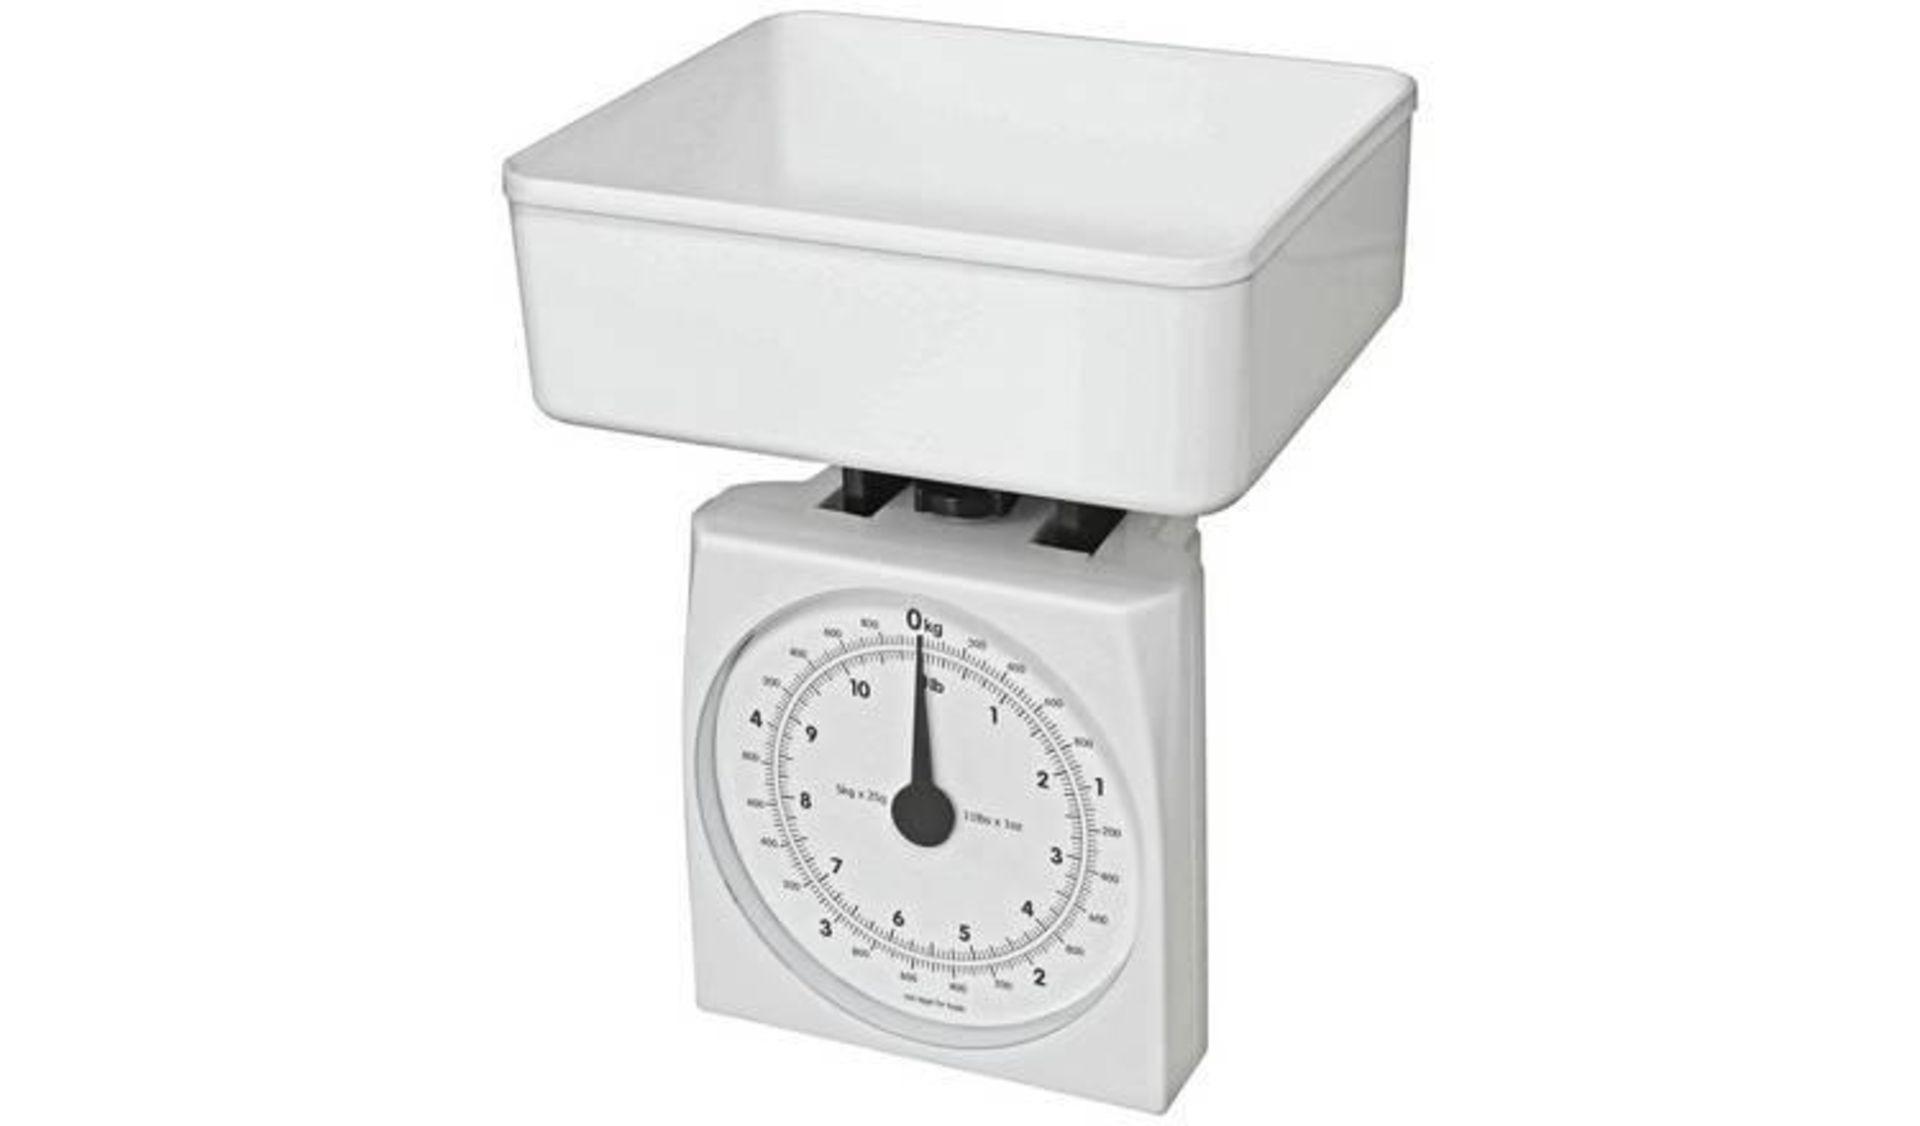 Argos Home Mechanical Scale 845/9749 £6.00 RRP